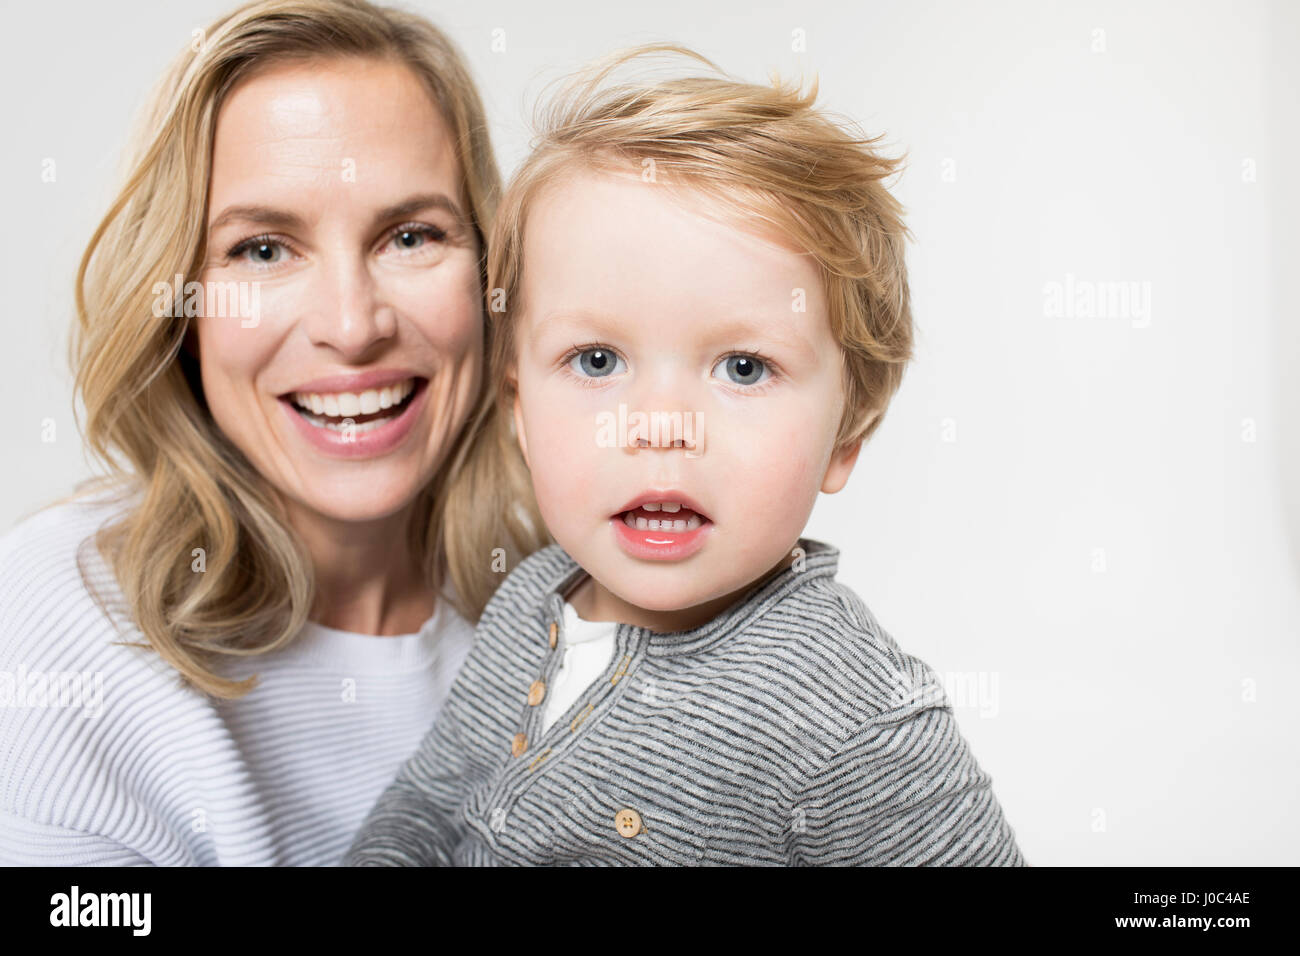 Portrait of mother and son against white background, smiling Stock Photo